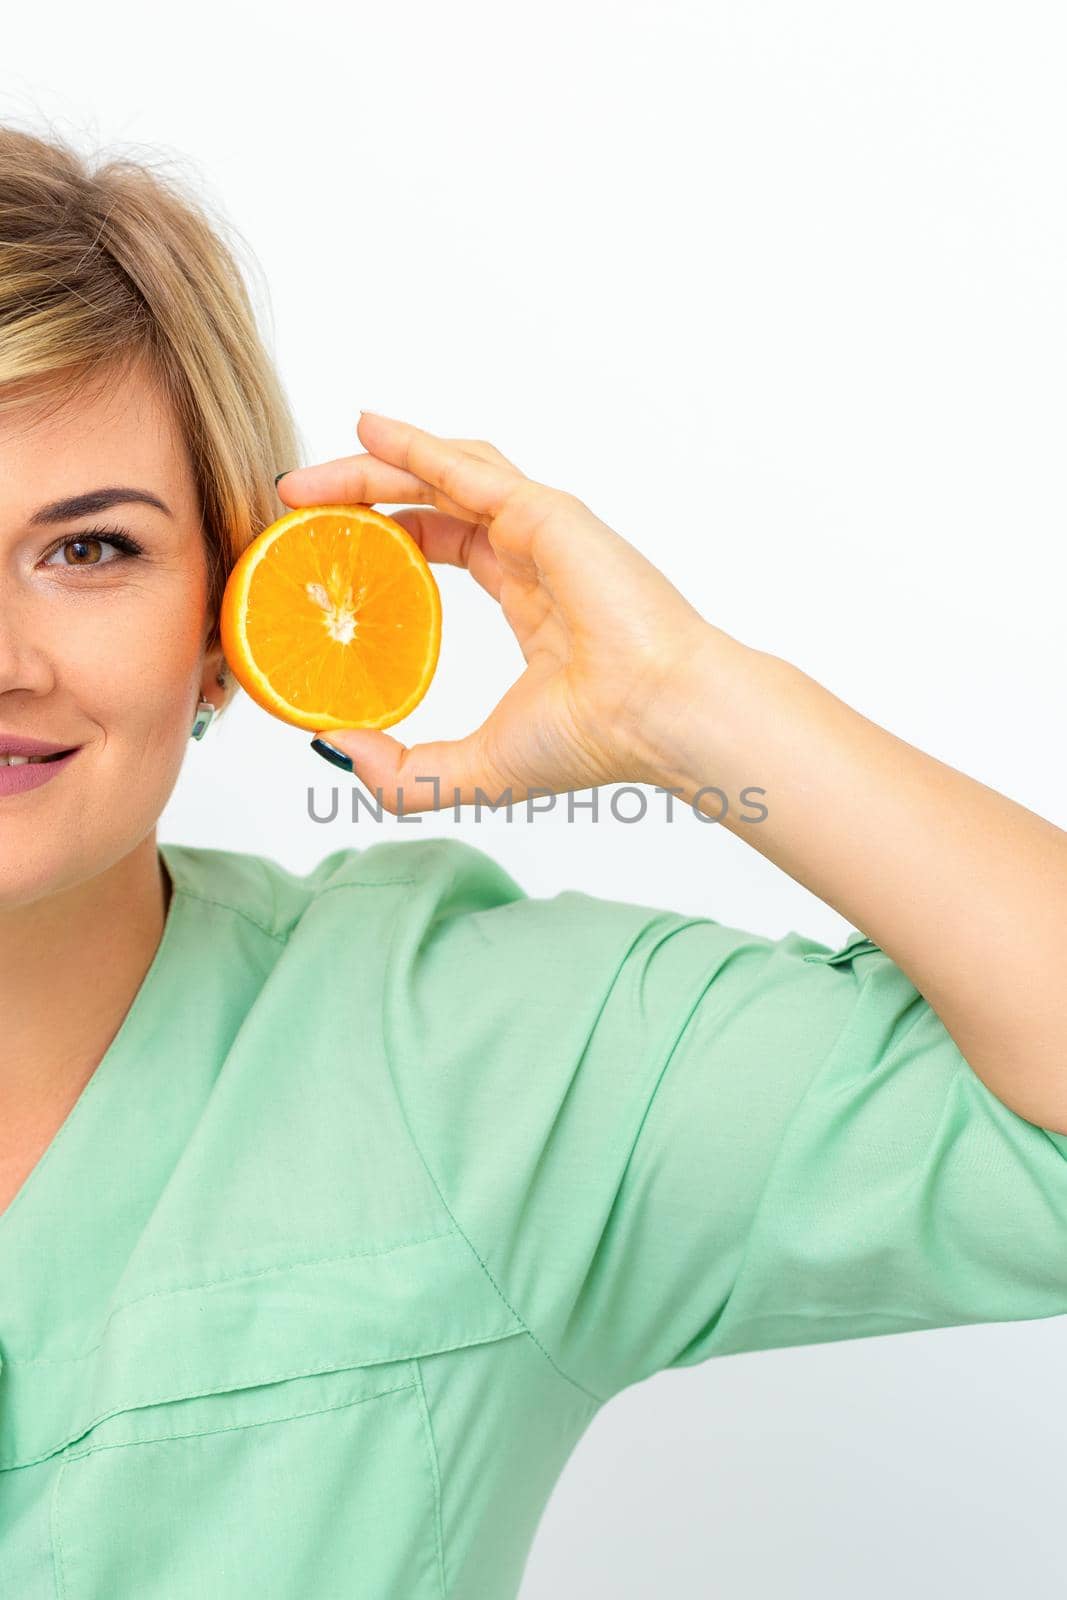 Portrait of young smiling blonde woman cosmetologist with halves of oranges on white background